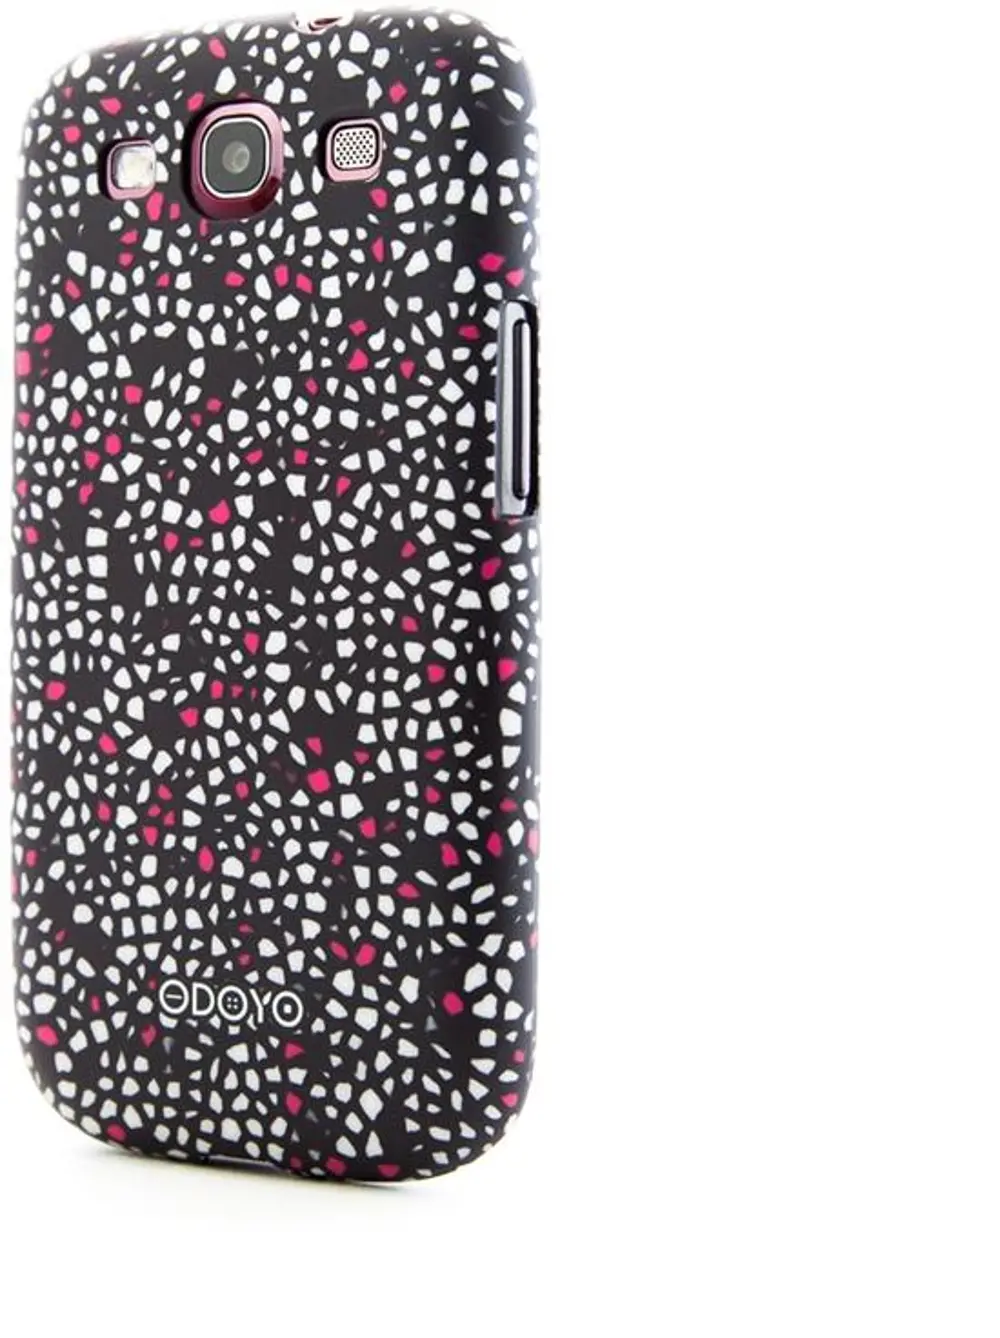 Odoyo Mosaic Case for Galaxy SIII - Black Morion-1